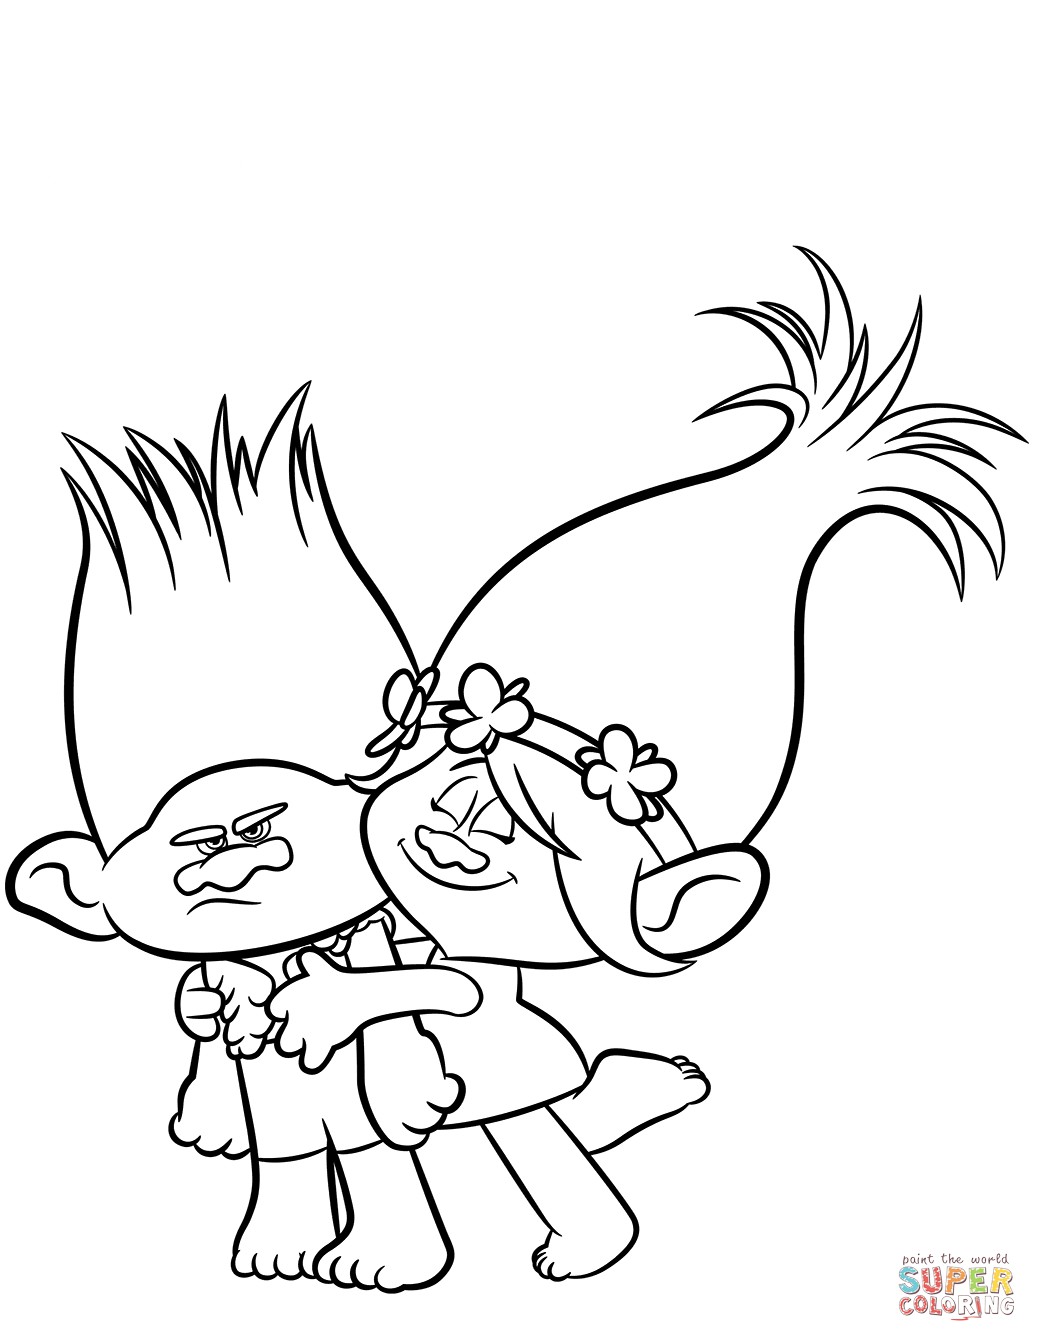 Discover ideas about Troll Party Free Printable Trolls Coloring Pages